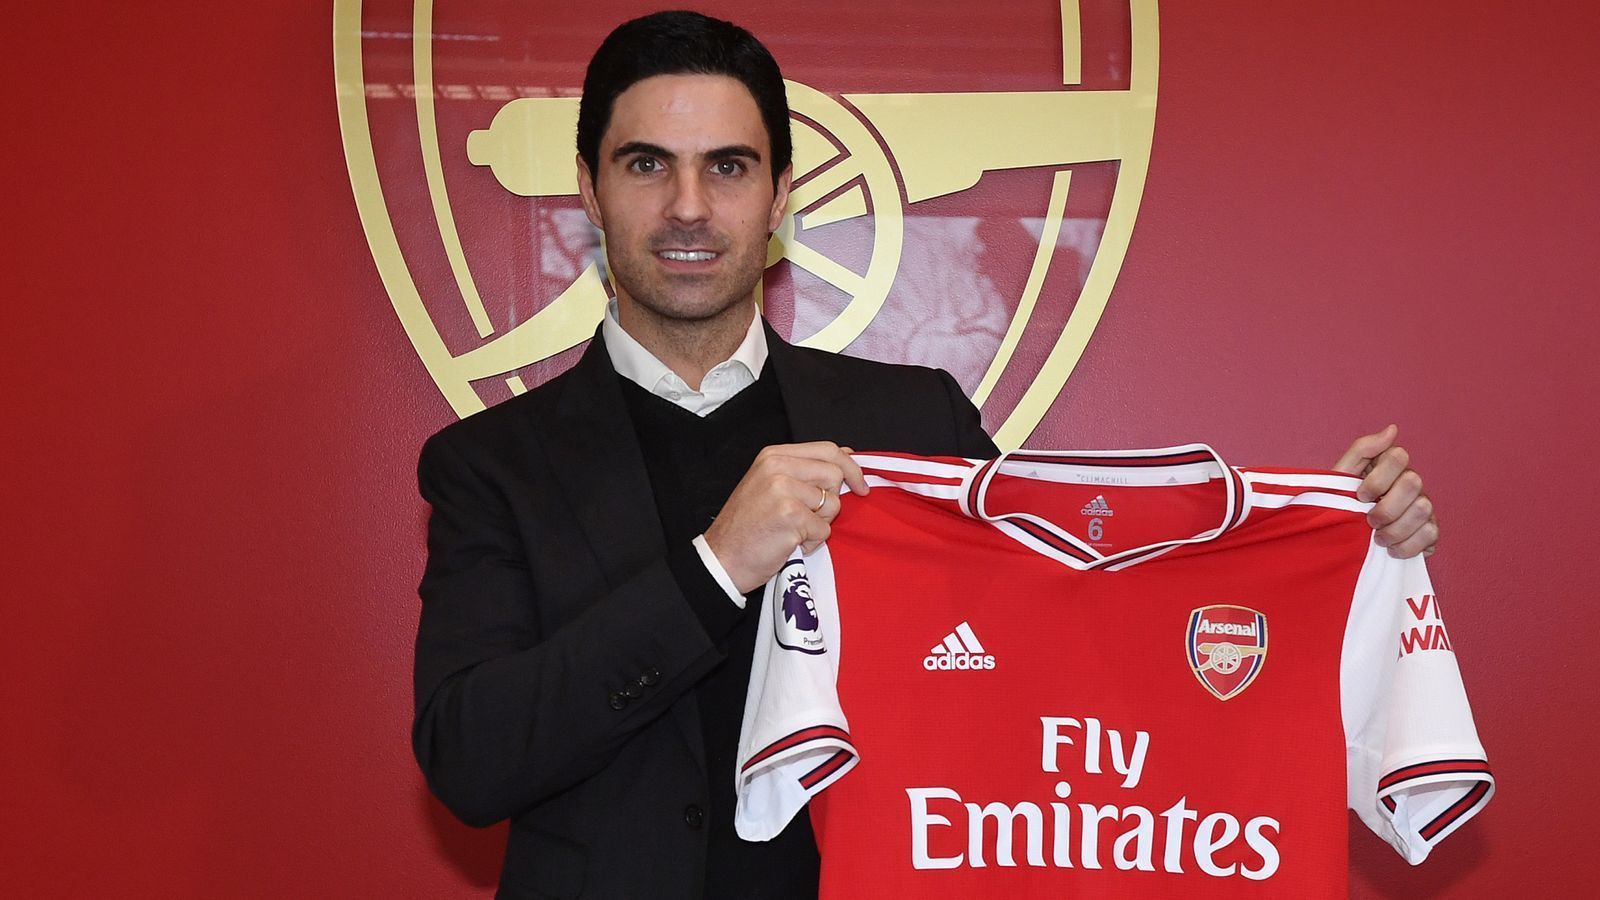 Mikel Arteta posing with the Arsenal jersey after being appointed as head coach in 2019.